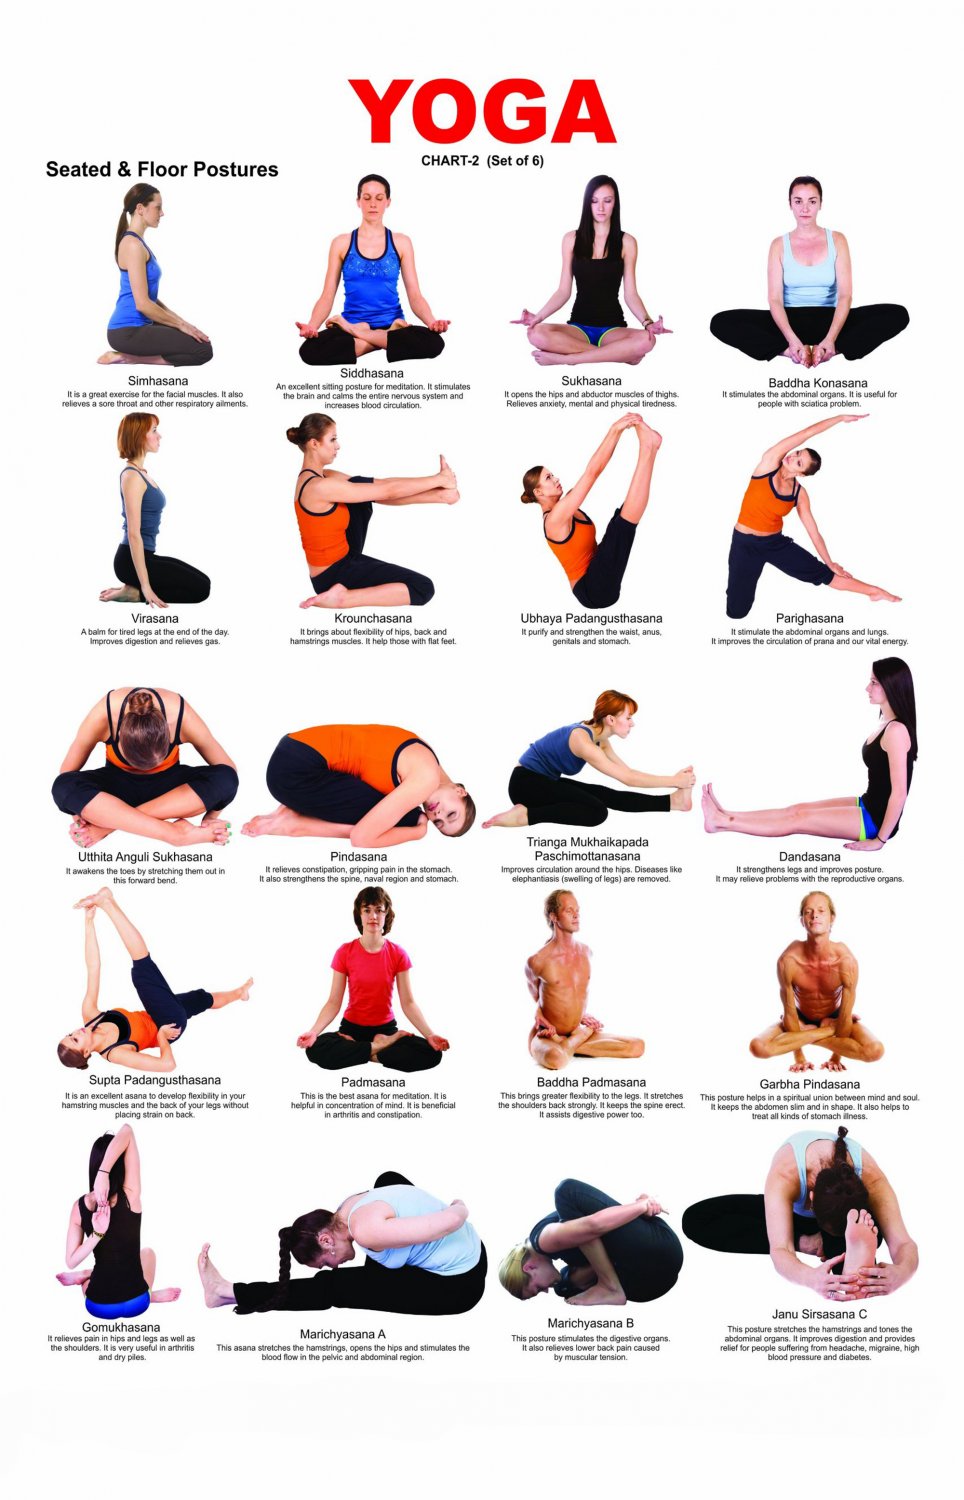 Yoga Seated & Floor Postures Chart 13"x19" (32cm/49cm) Polyester Fabric Poster